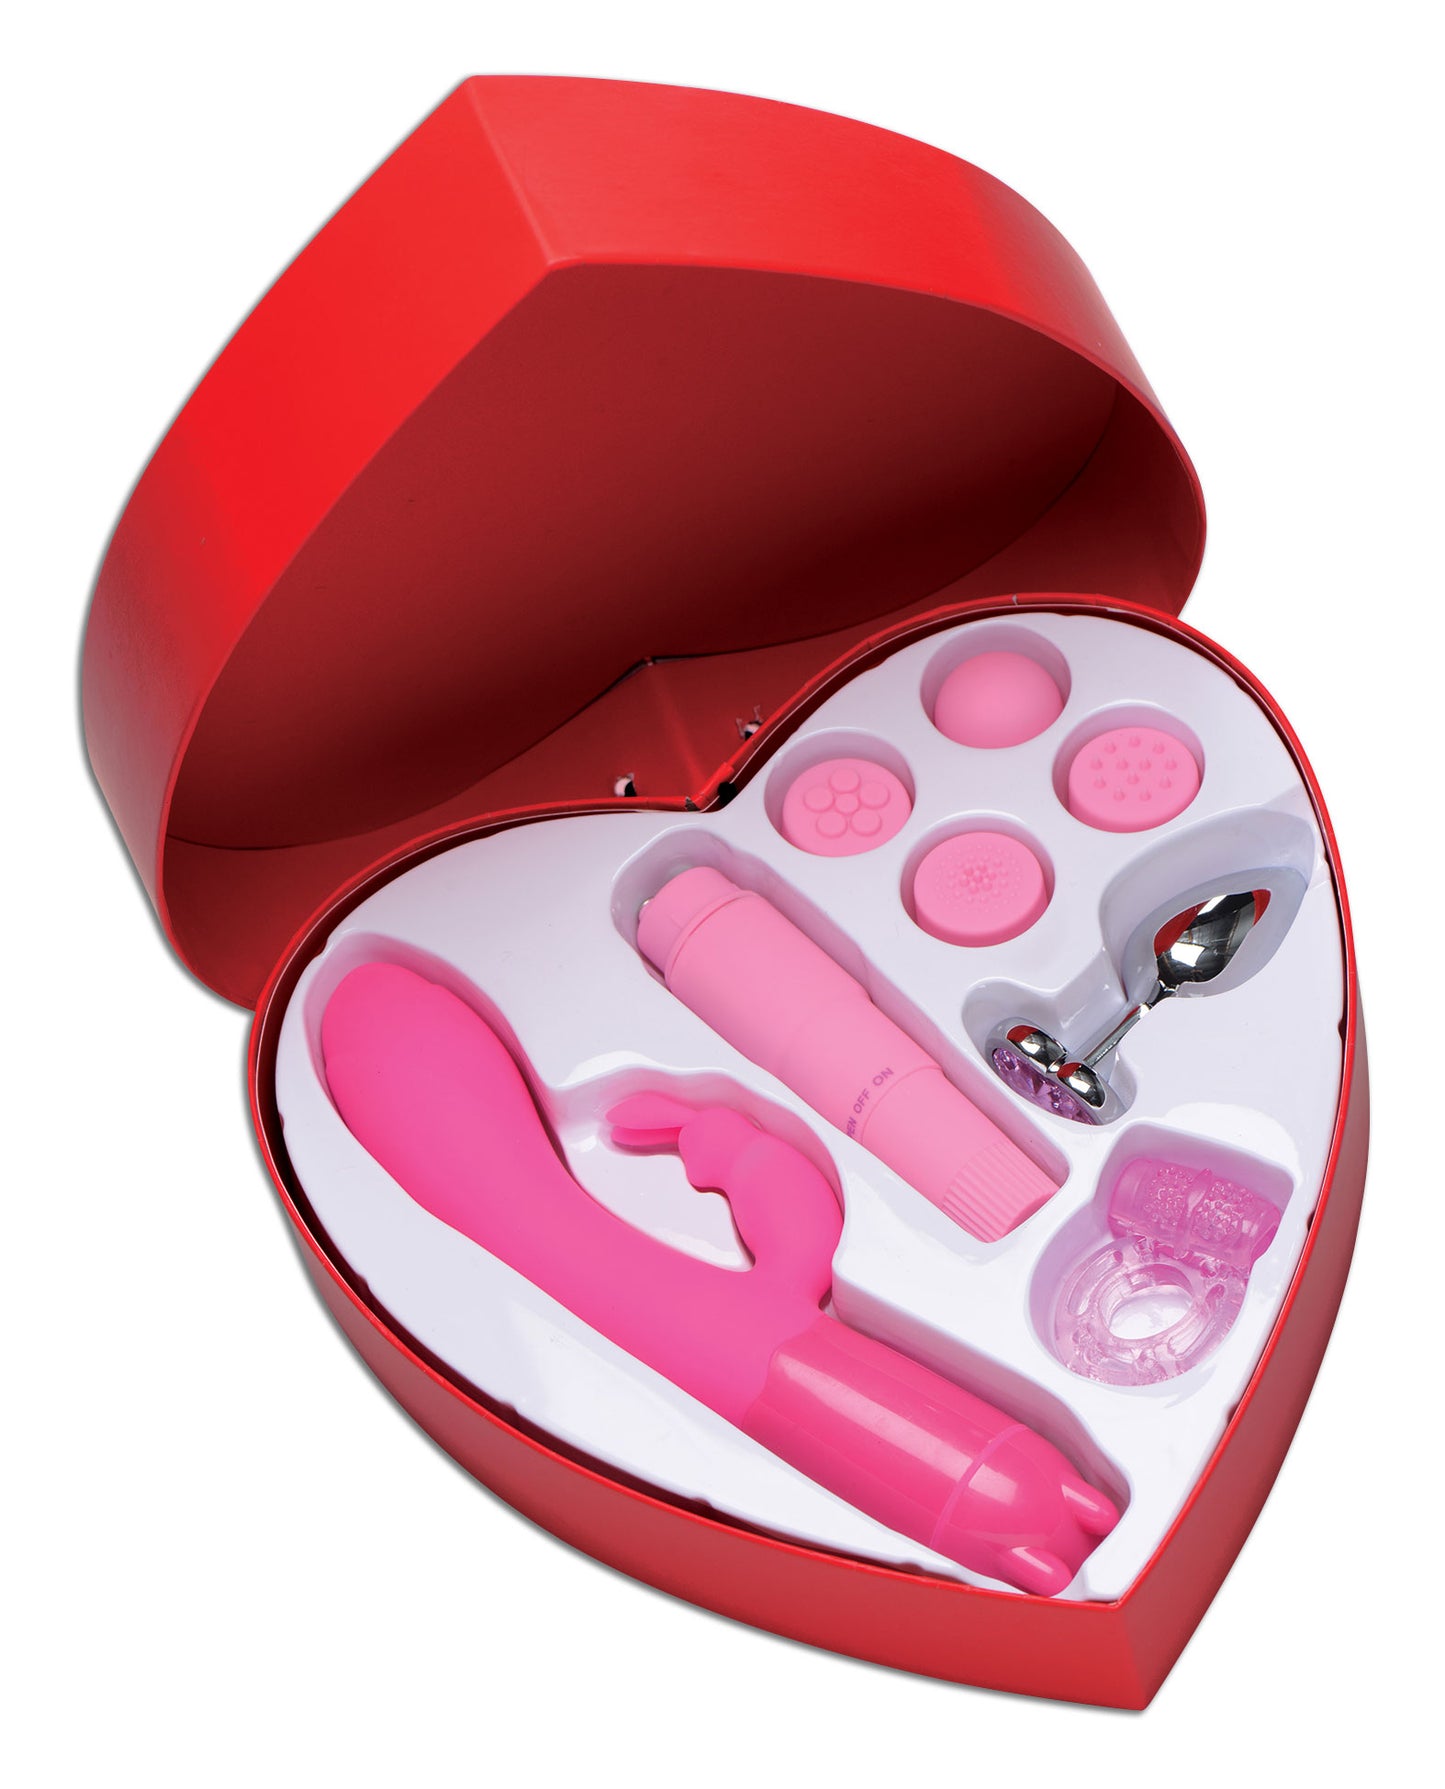 Passion Deluxe Kit with Heart Gift Box - UABDSM